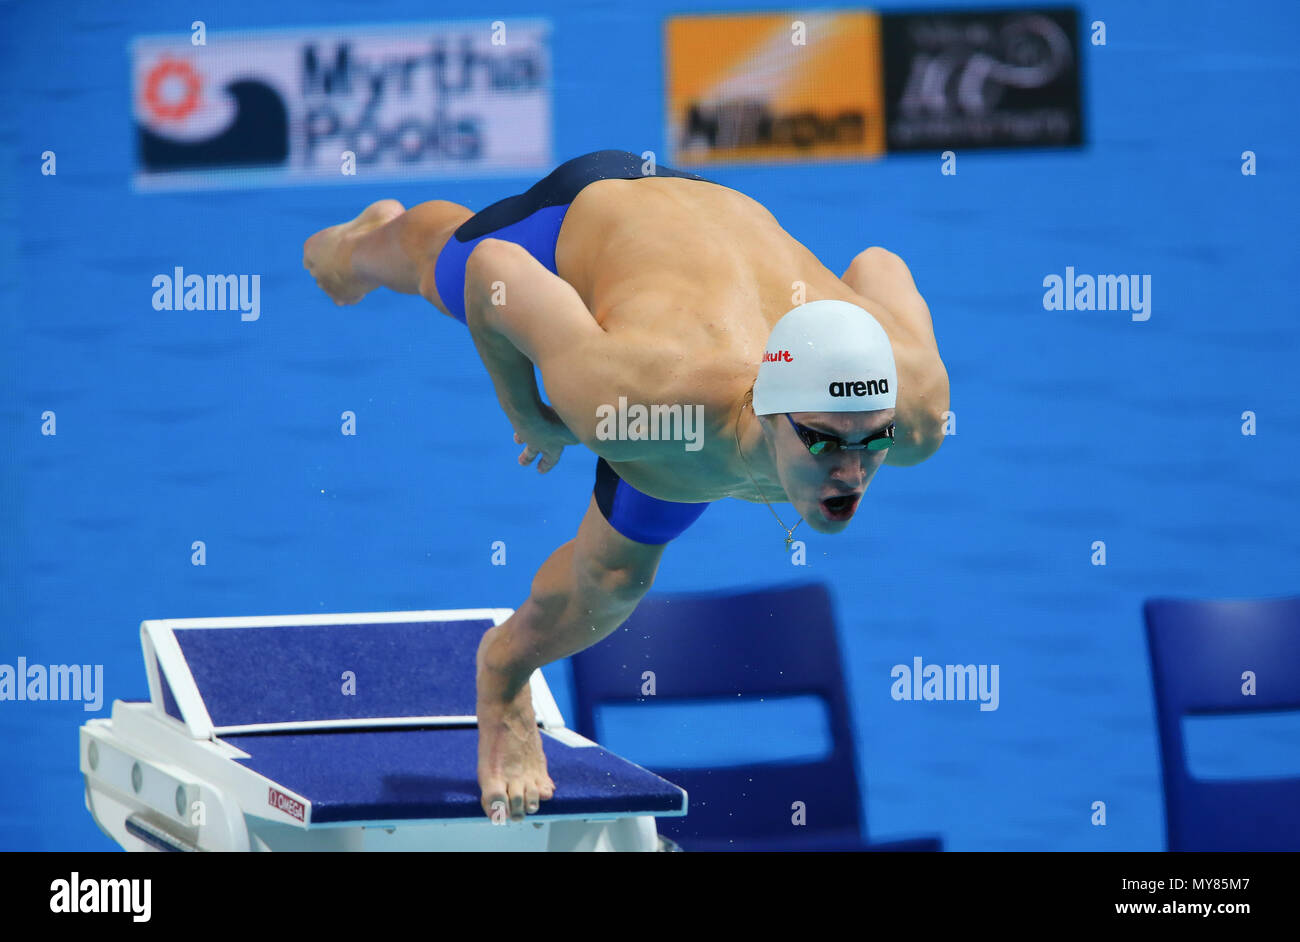 BUDAPEST, HUNGARY - JULY 25: Daniil Pakhomov of Russia  in the heats of the mens 200m butterfly during day 12 of the FINA World Championships at Duna Arena on July 25, 2017 in Budapest, Hungary. (Photo by Roger Sedres/ImageSA/Gallo Images) Stock Photo